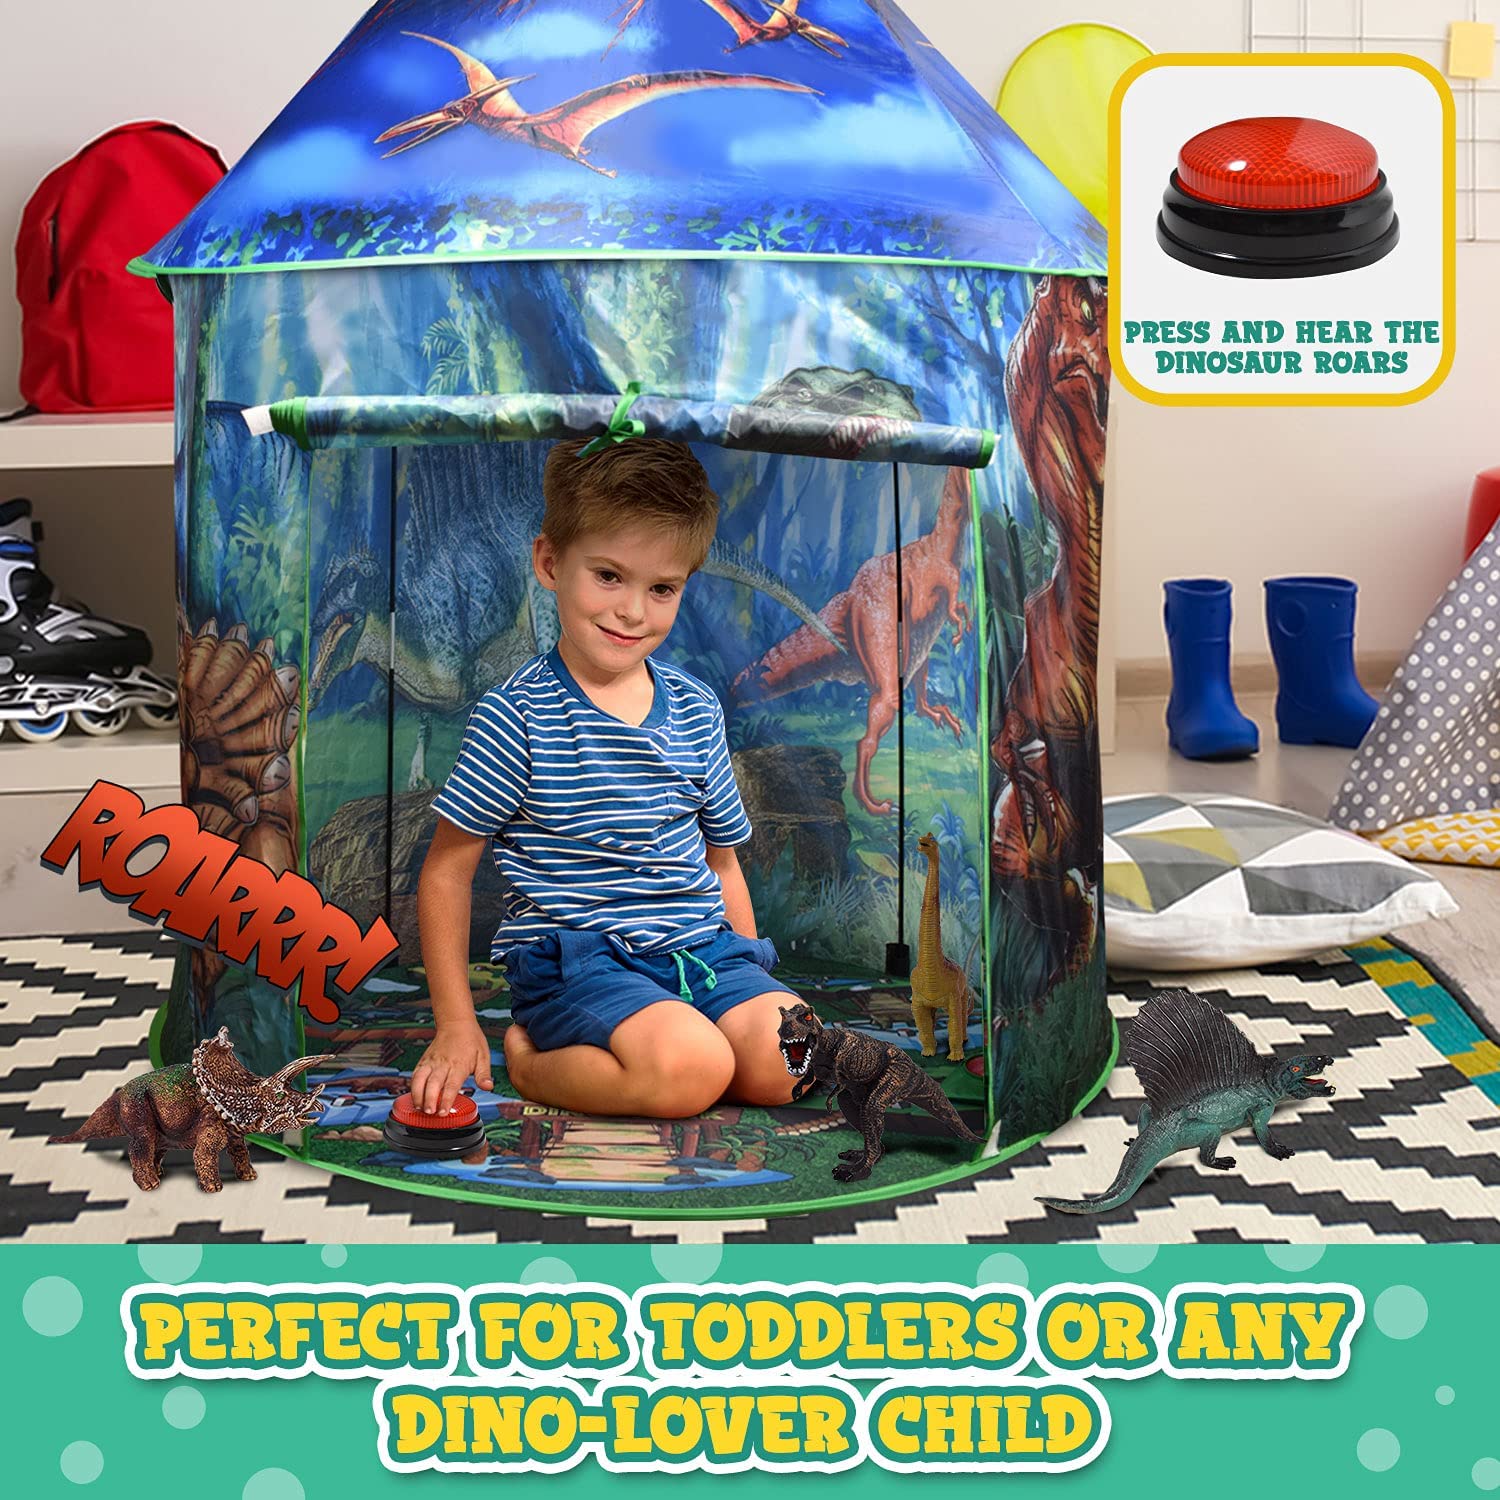 POCO DIVO Dinosaur Play House, Kids Outdoor Park  Camping Toy Tent, Toddler 価格比較